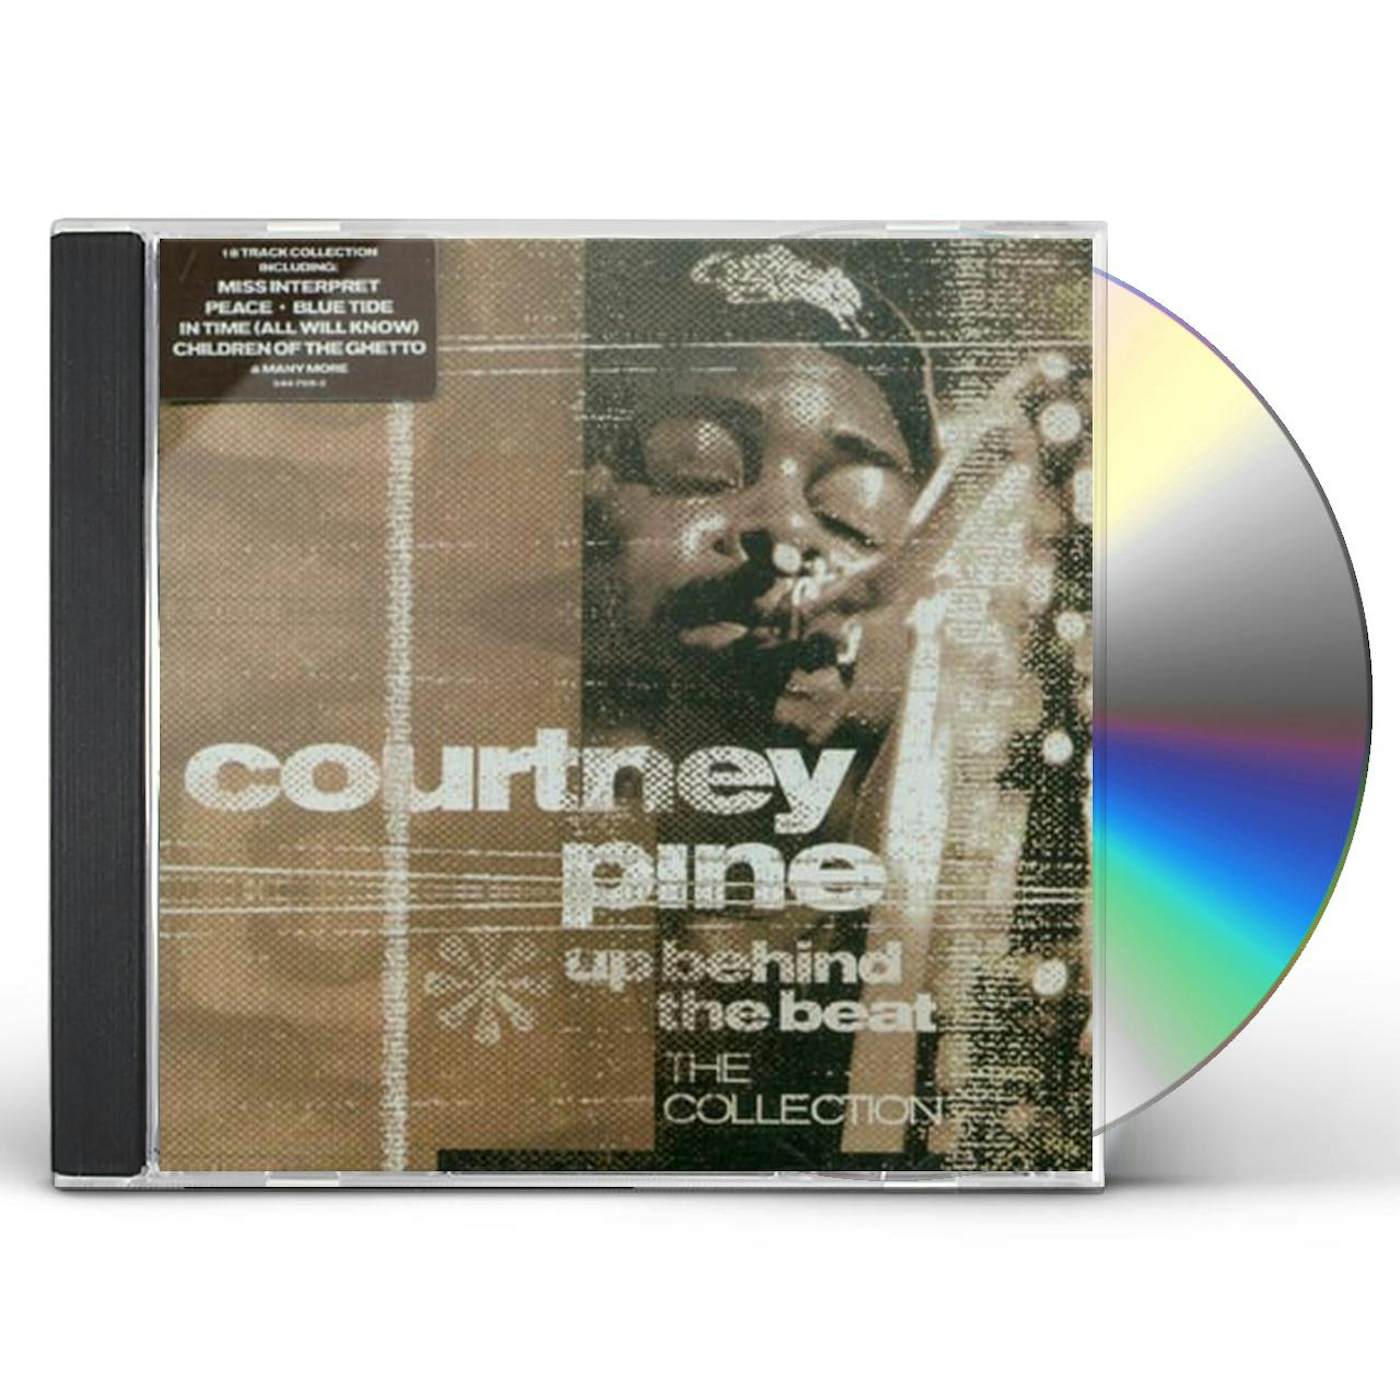 Courtney Pine COLLECTION CD